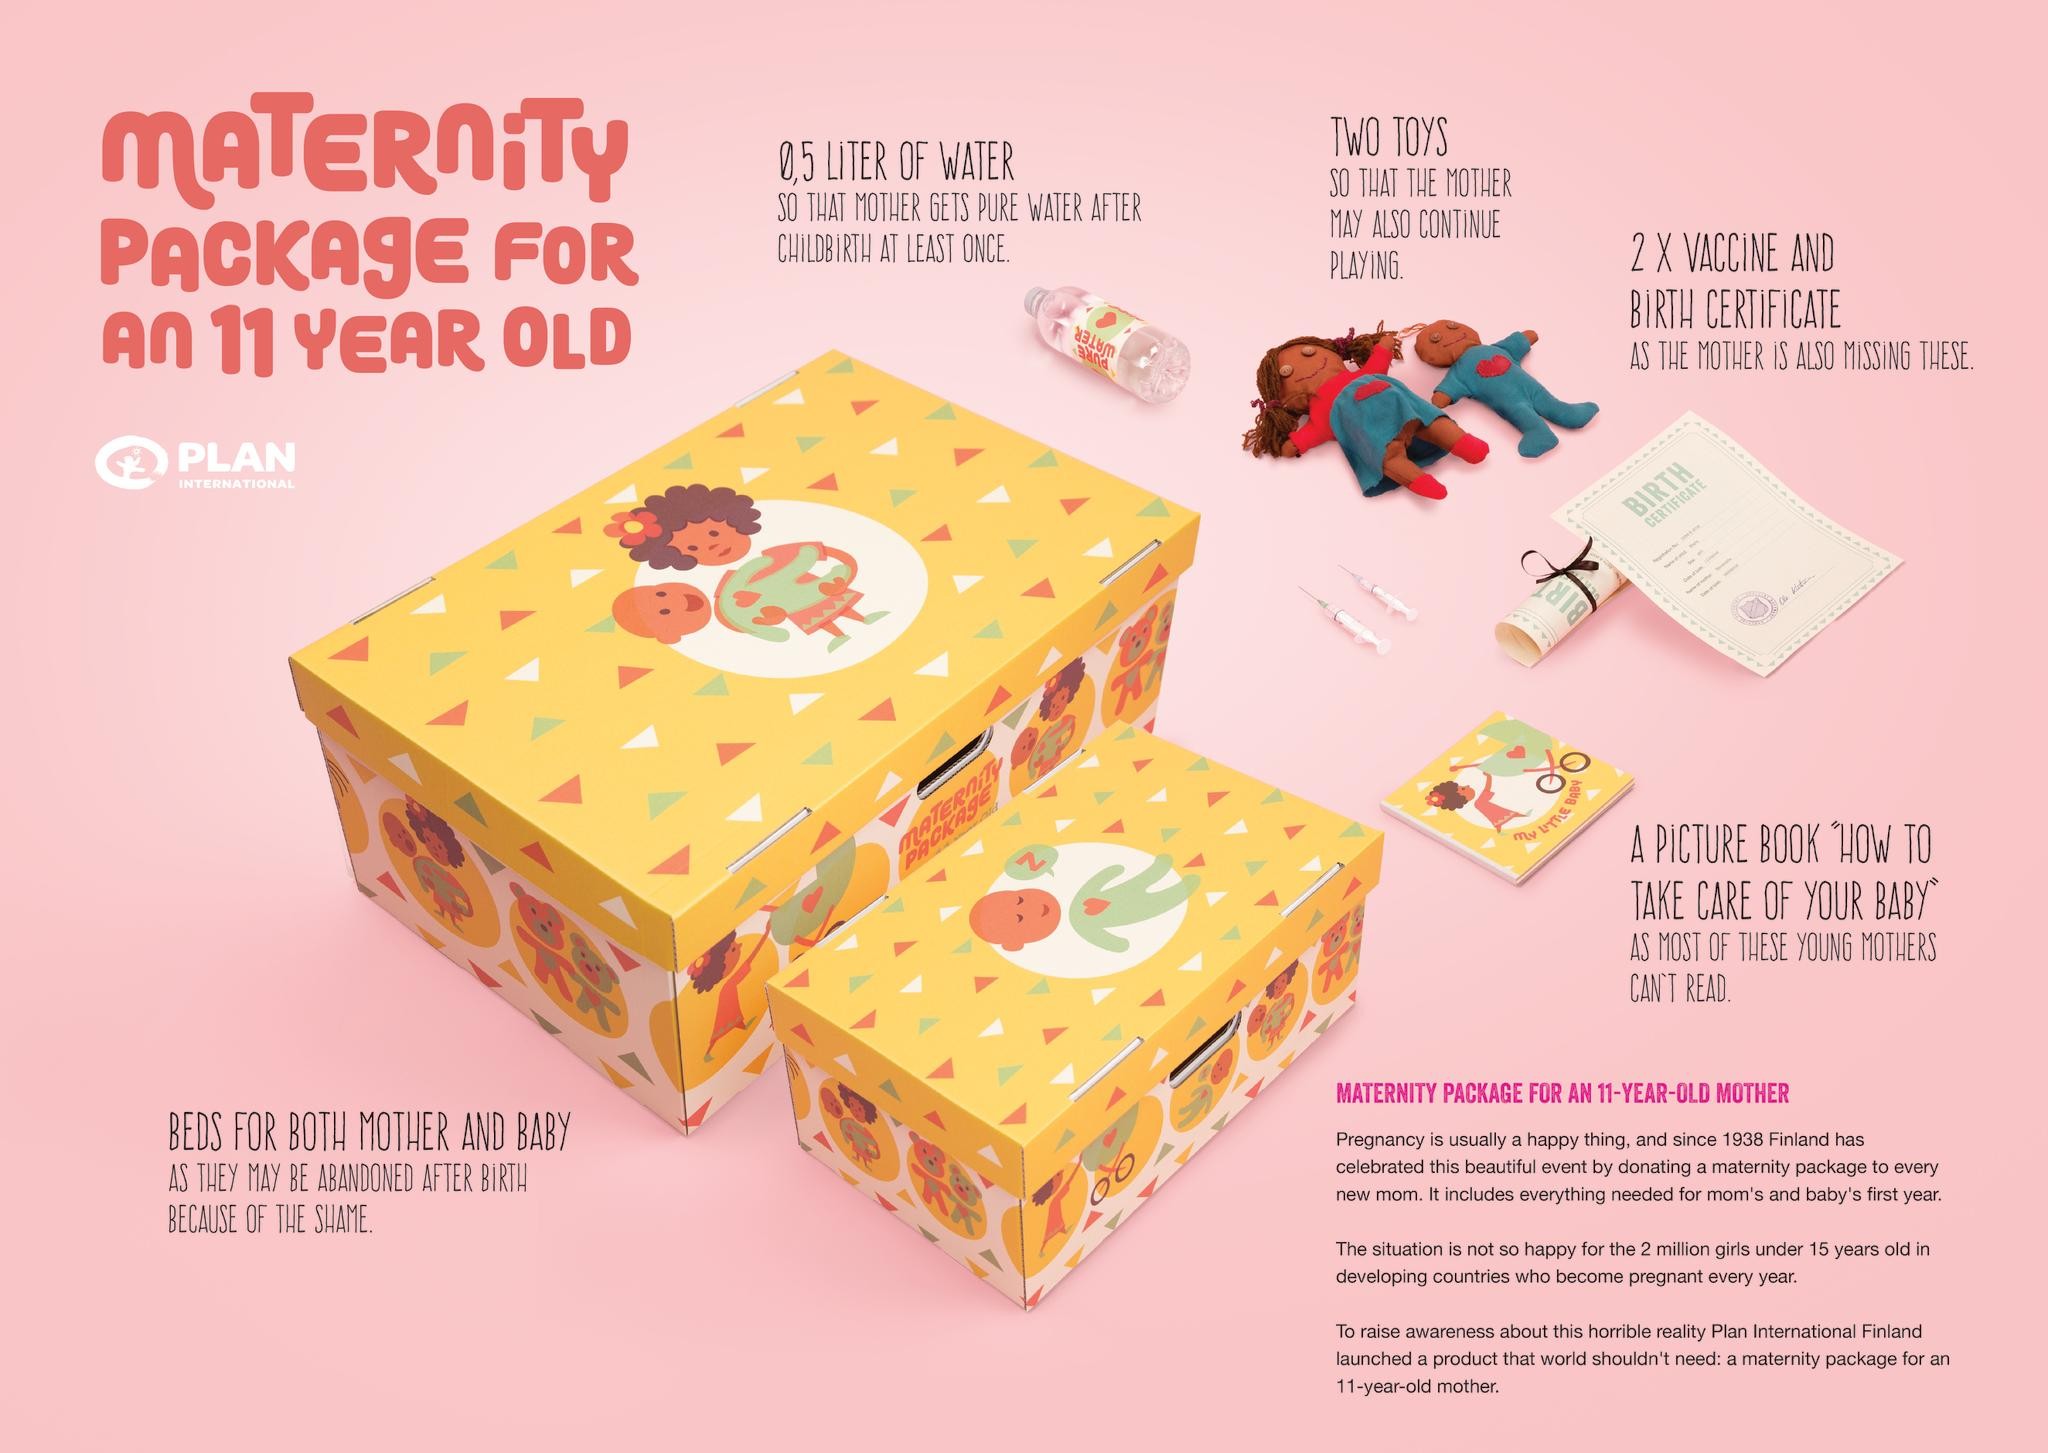 Maternity package for an 11-year-old mother